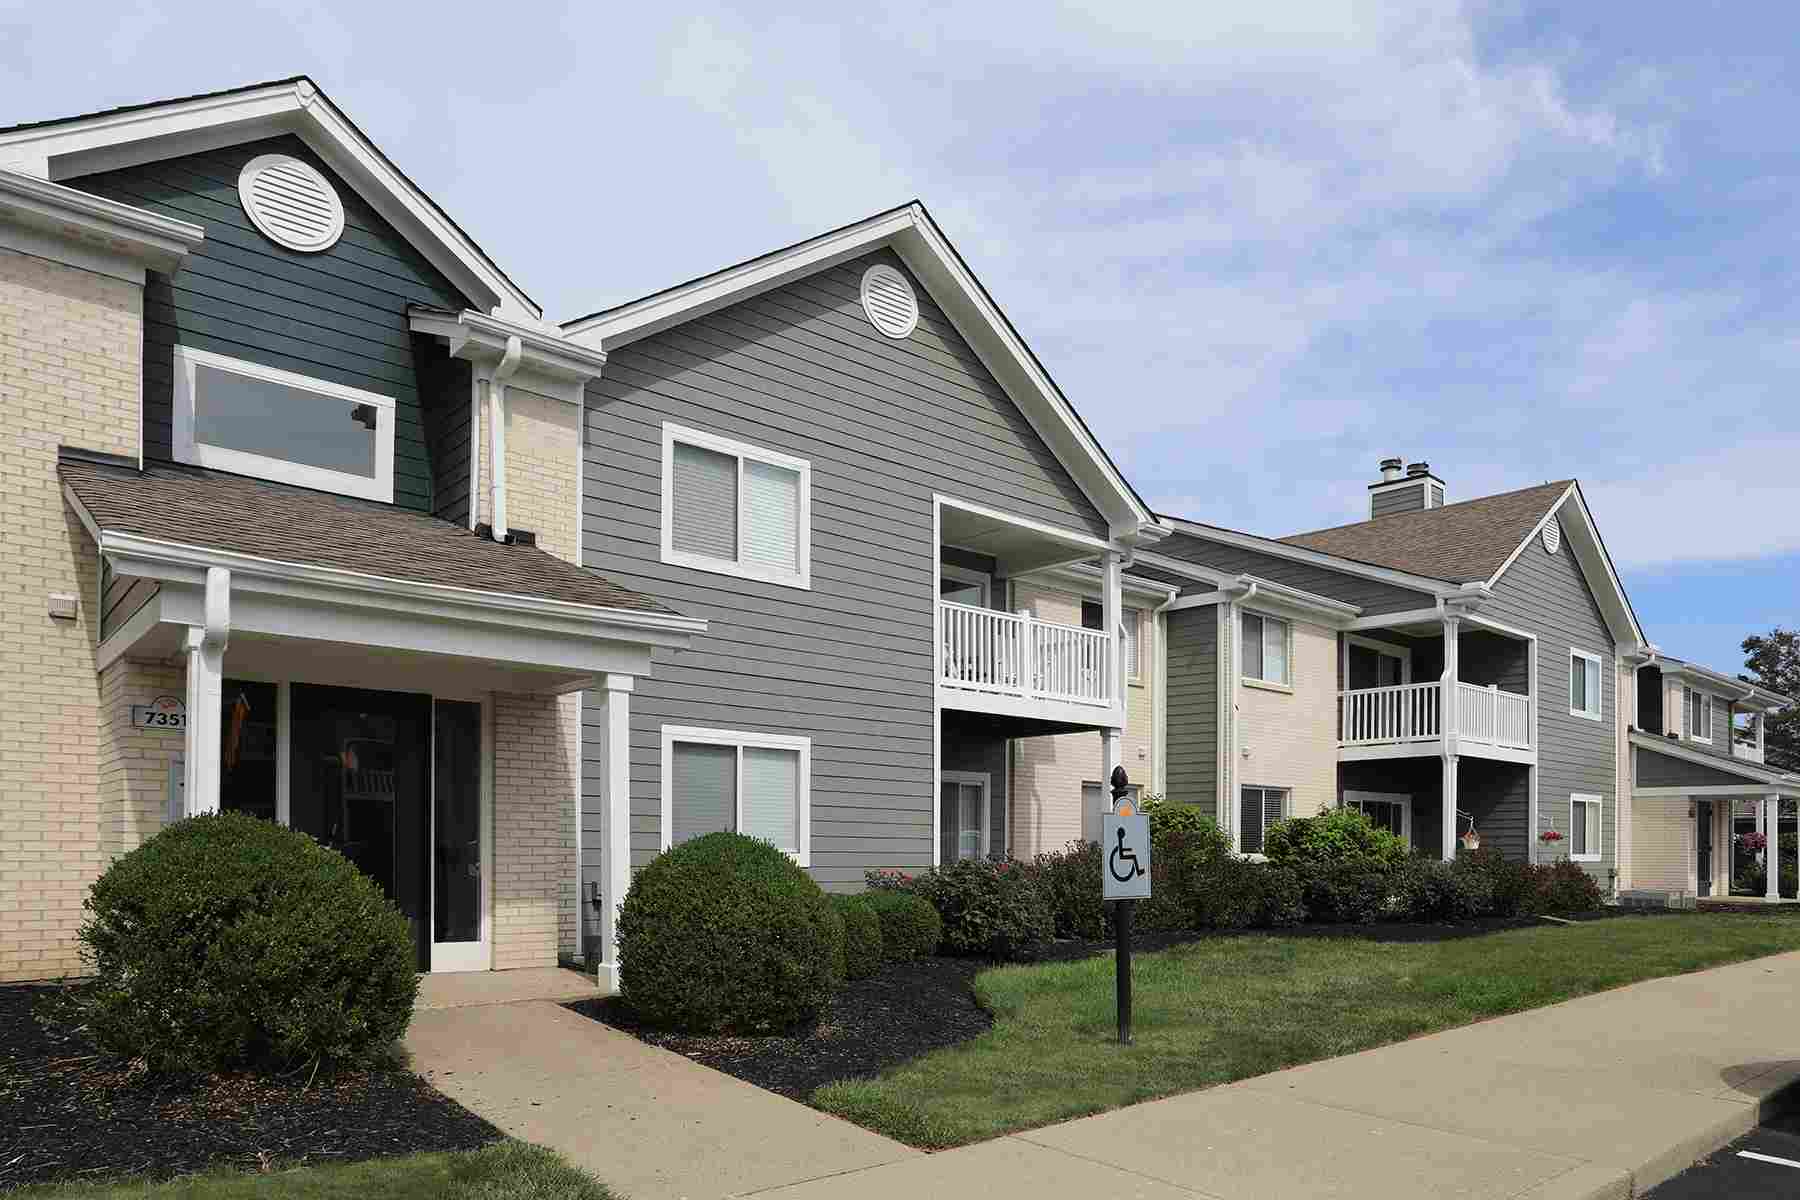 A two story apartment complex overlooks a parking lot featuring handicap accessible parking.